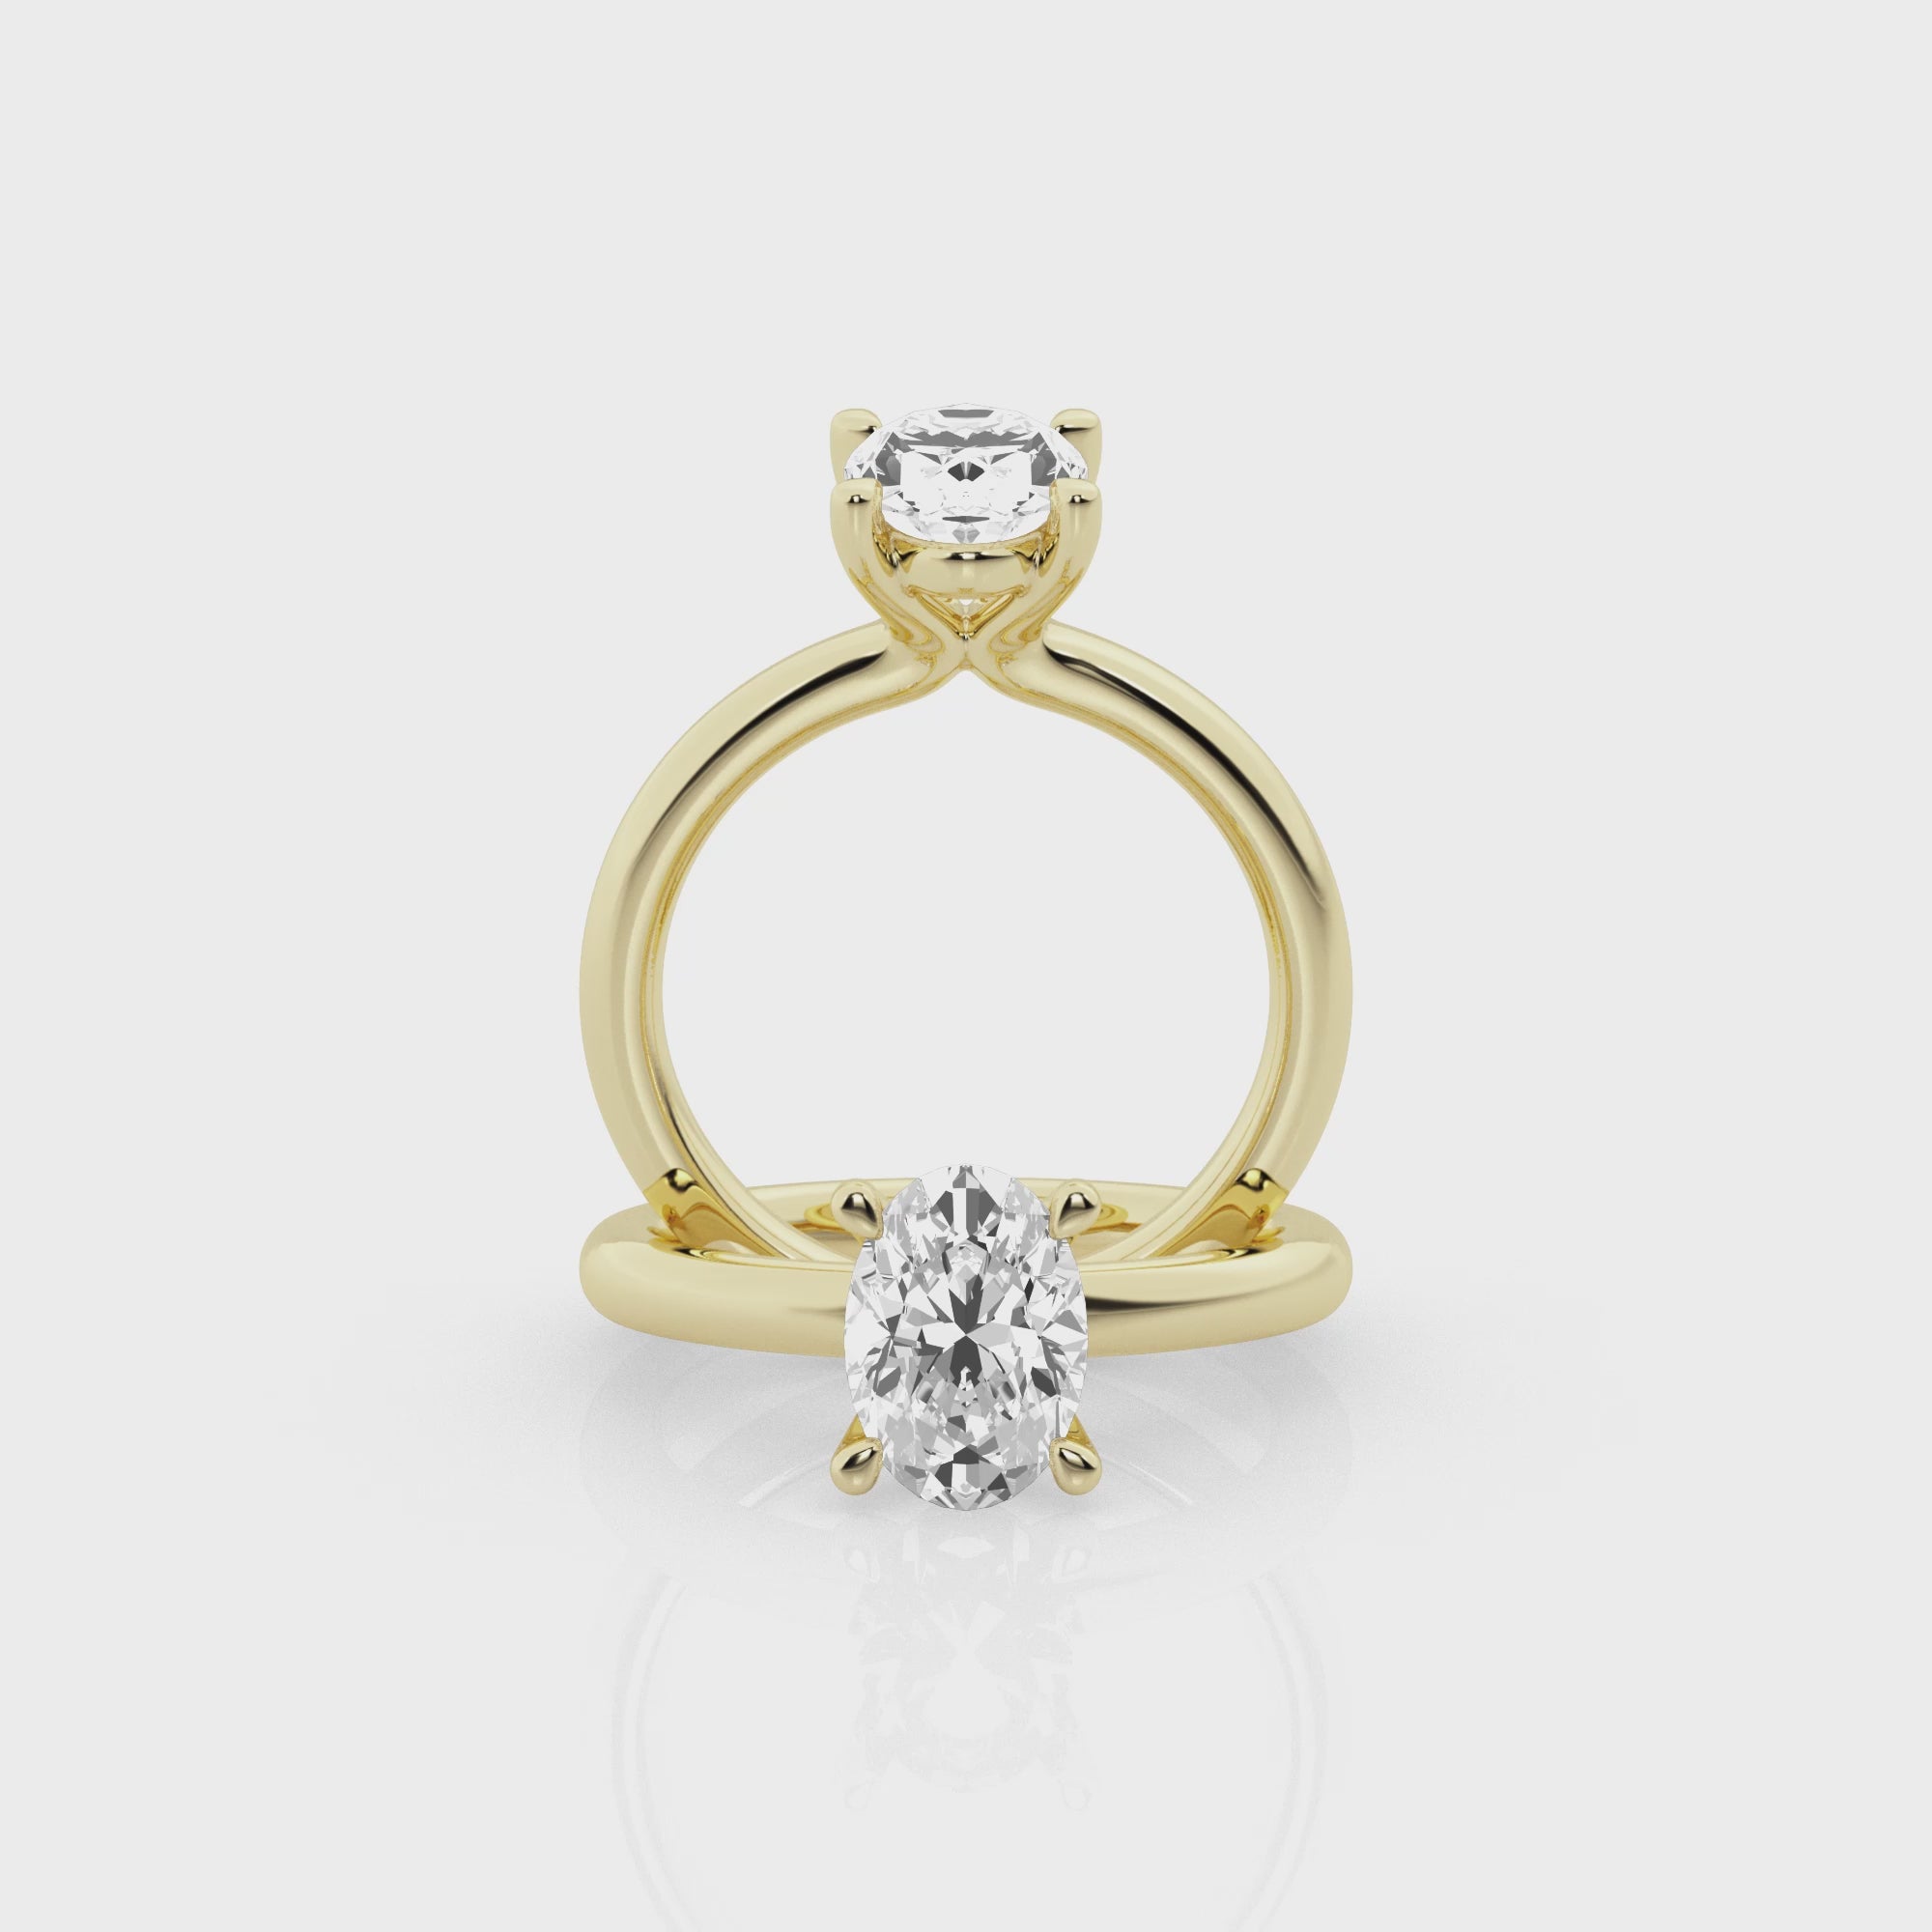 2 carat Oval Solitaire Diamond Ring